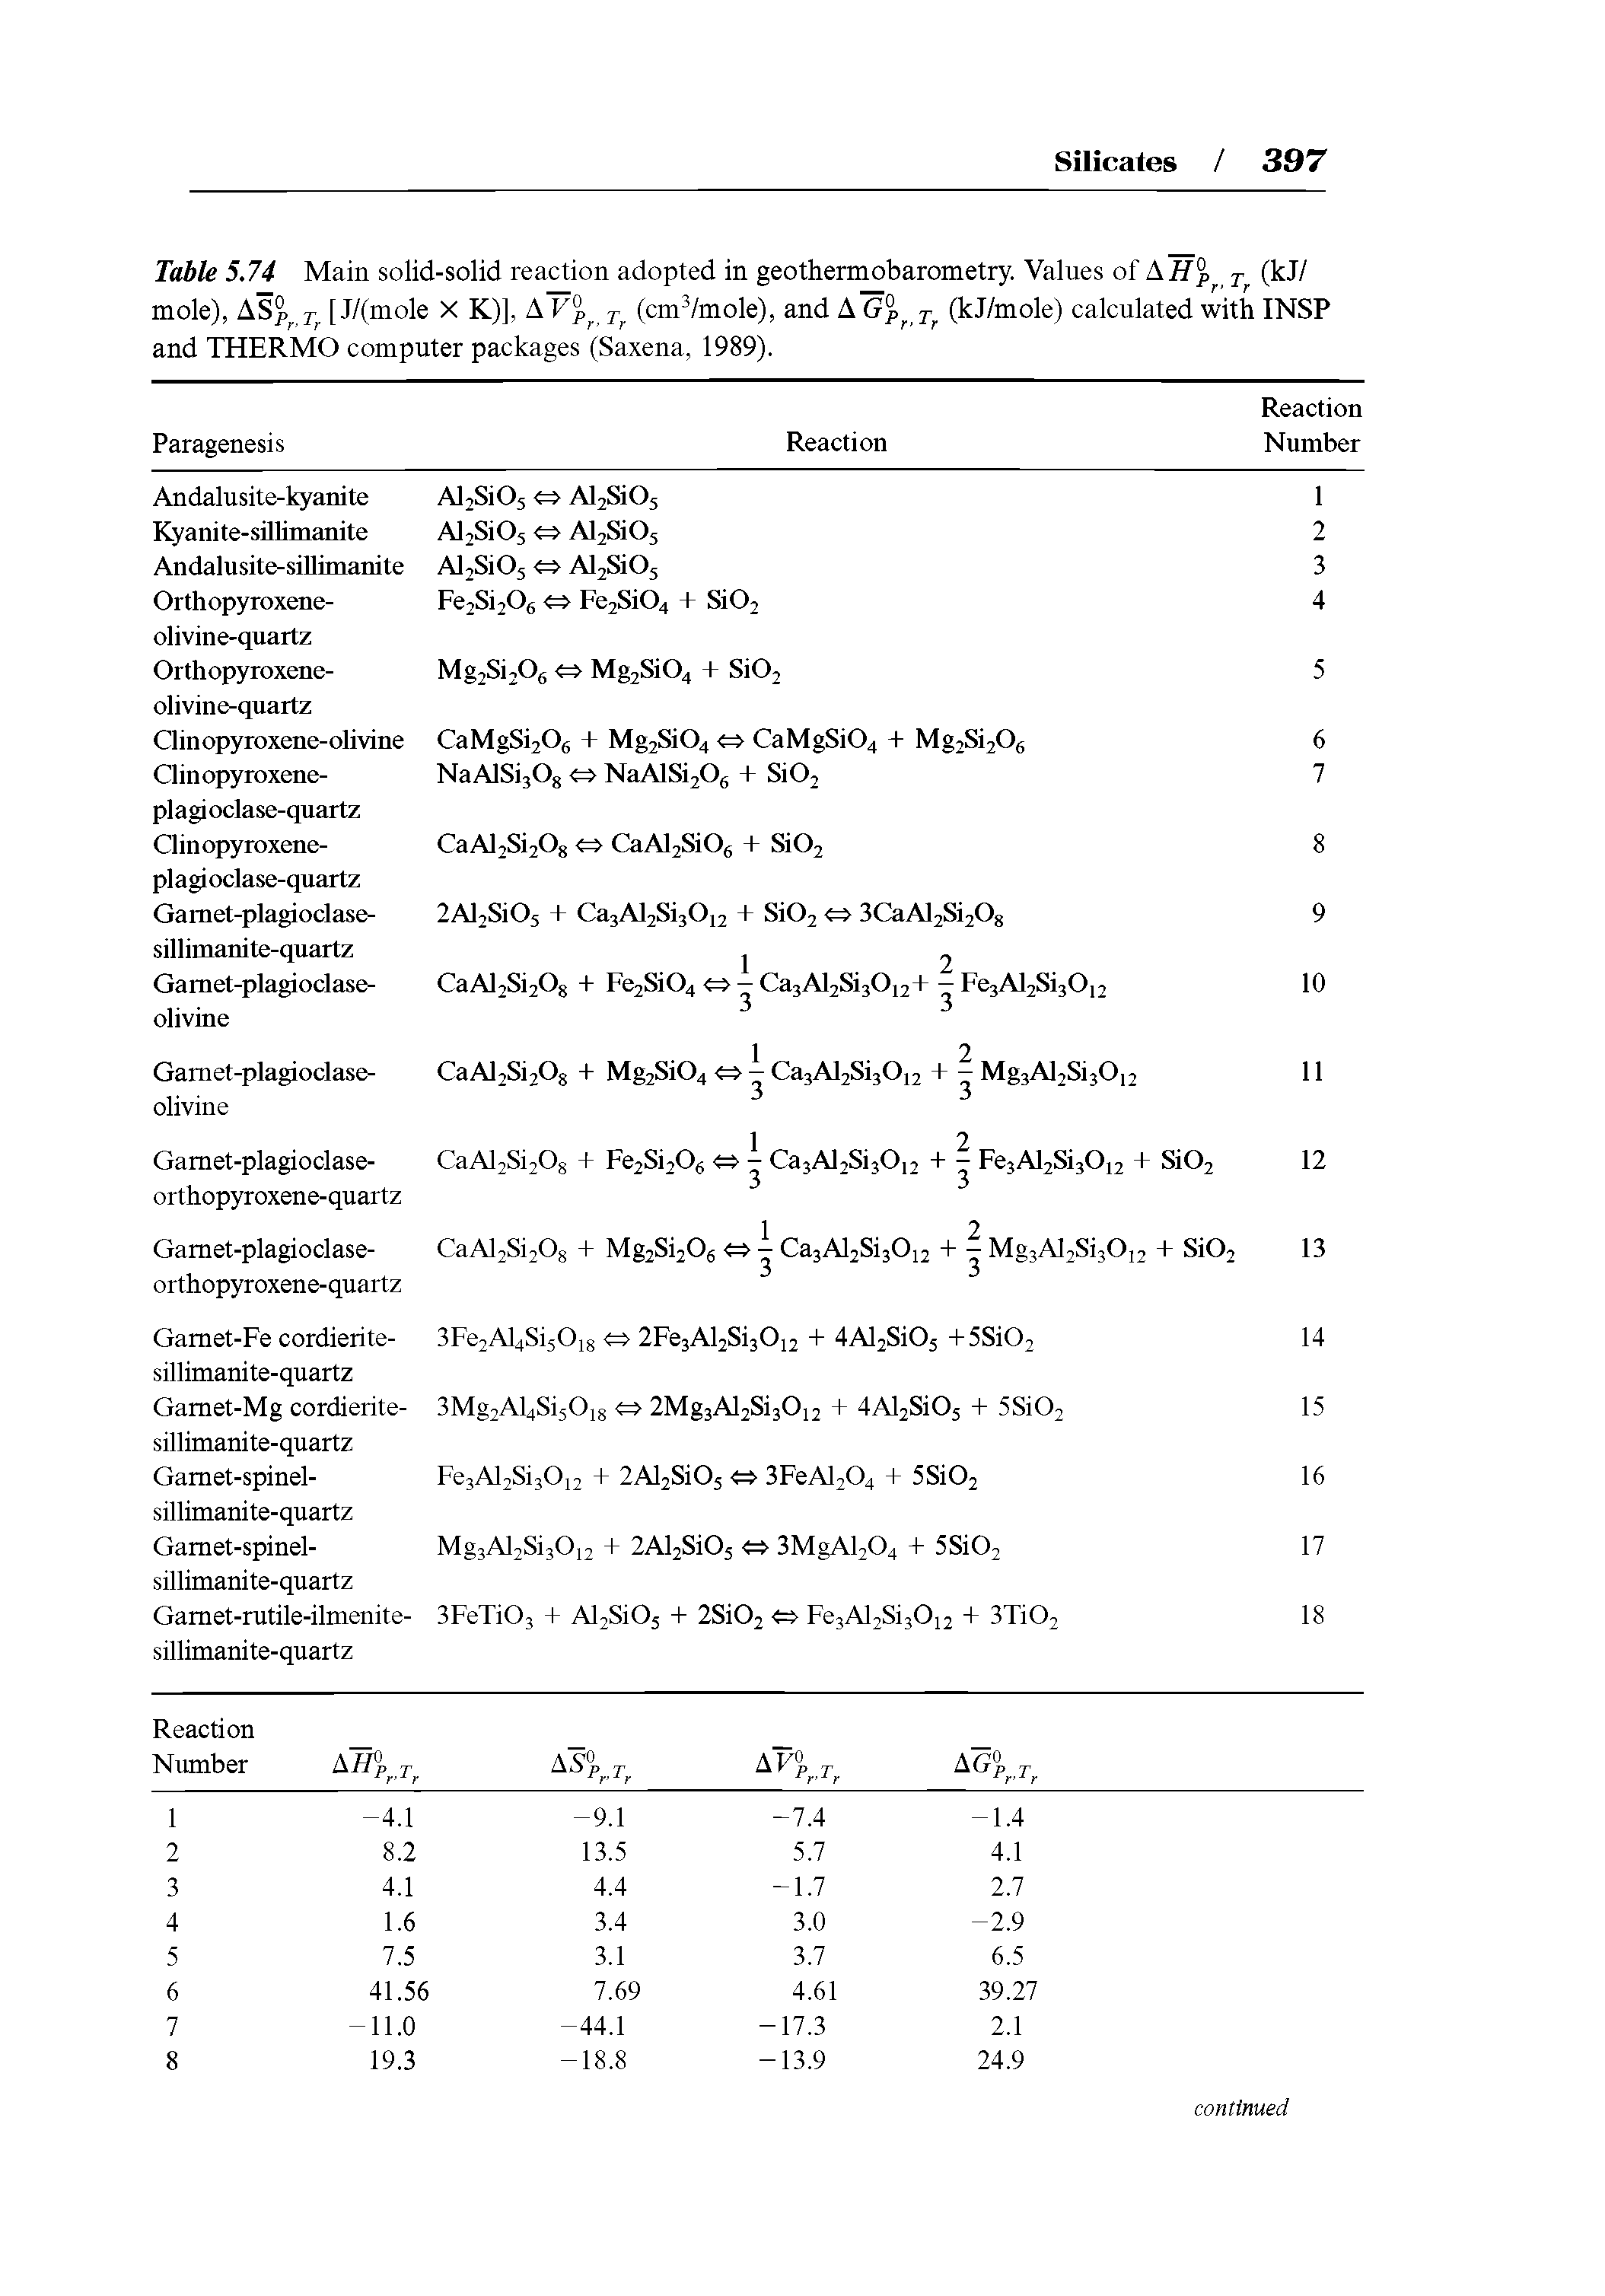 Table 5.74 Main solid-solid reaction adopted in geothermobarometry. Values of 15.11% j (kJ/ mole), ASp [J/(mole X K)], A V% (cmVmole), and A G% t, (kJ/mole) calculated with INSP and THERMO computer packages (Saxena, 1989).